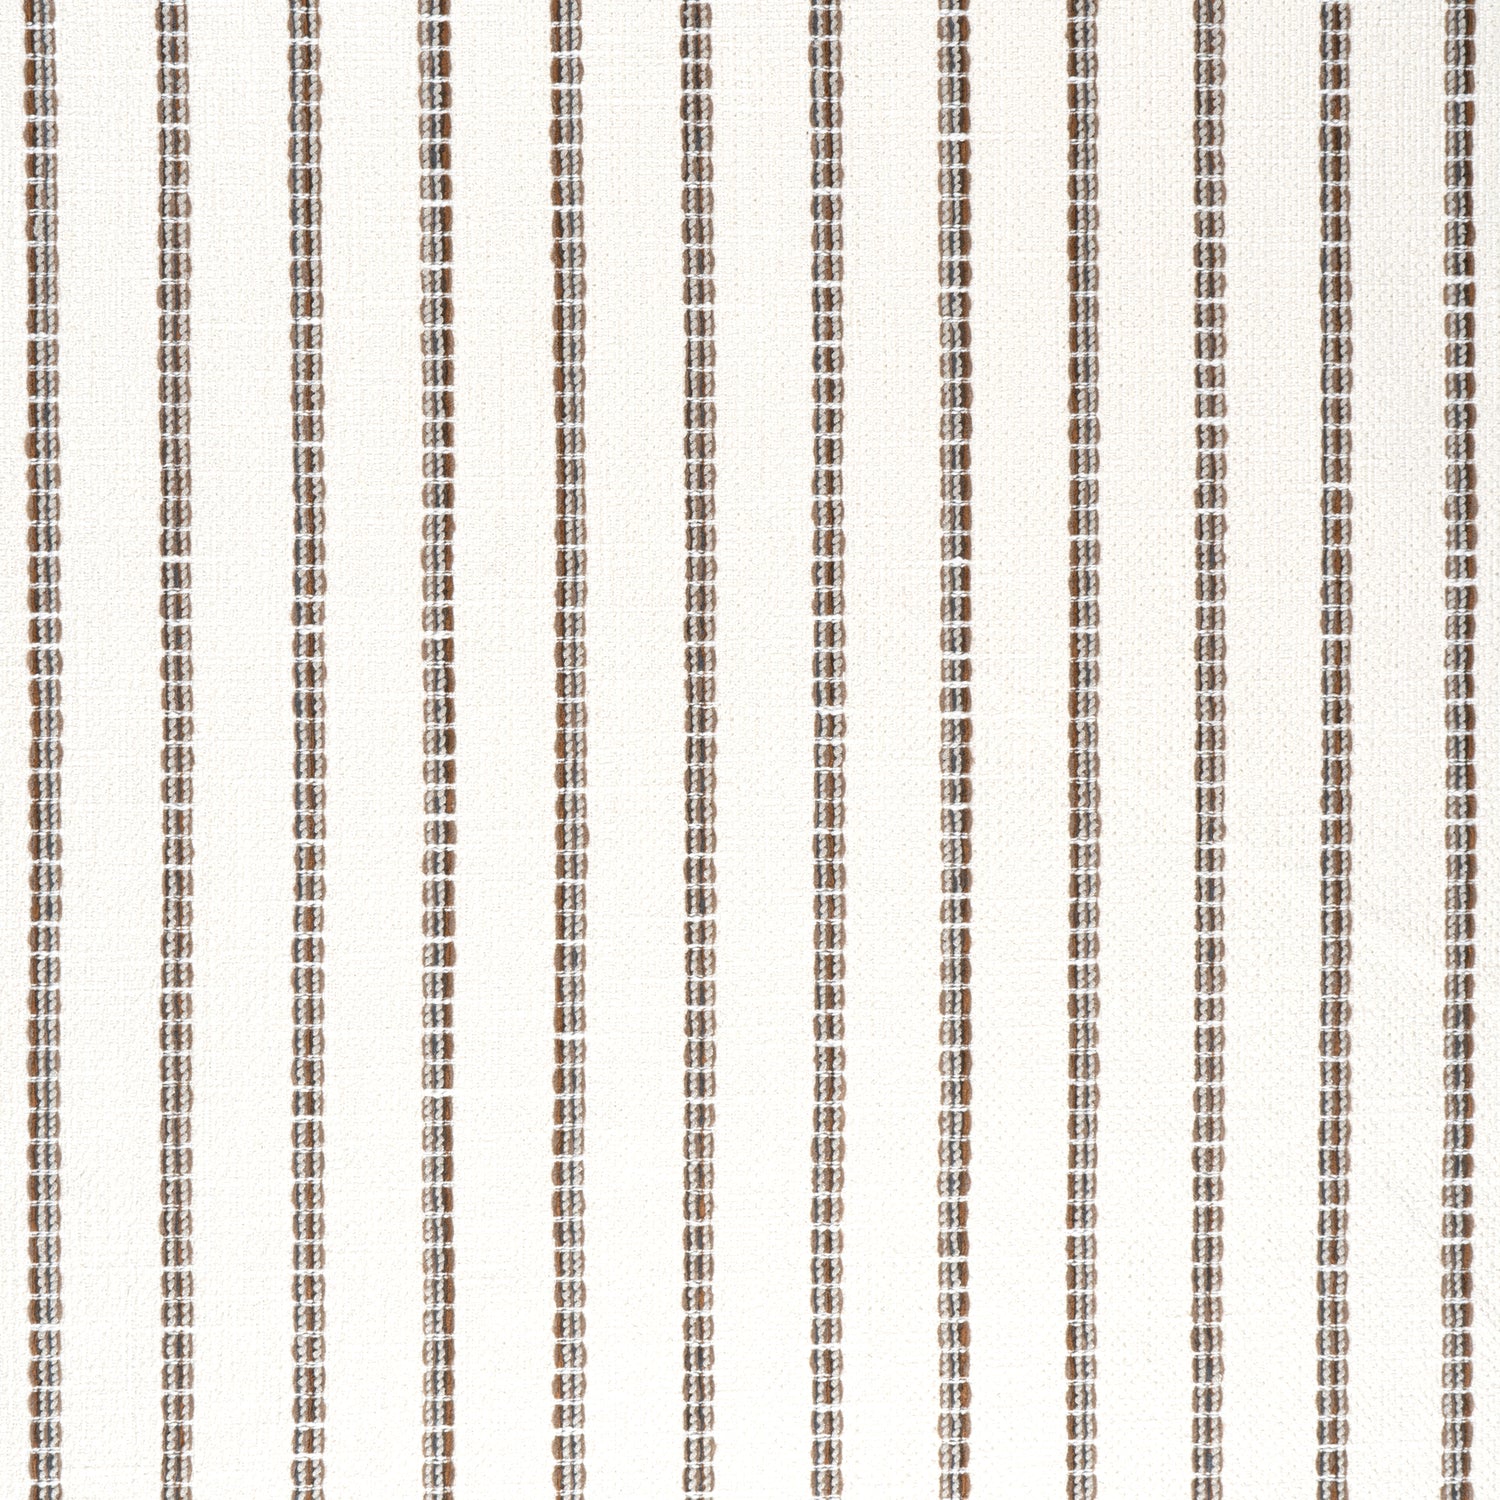 Oak Creek Stripe fabric in bark color - pattern number W78336 - by Thibaut in the  Sierra collection